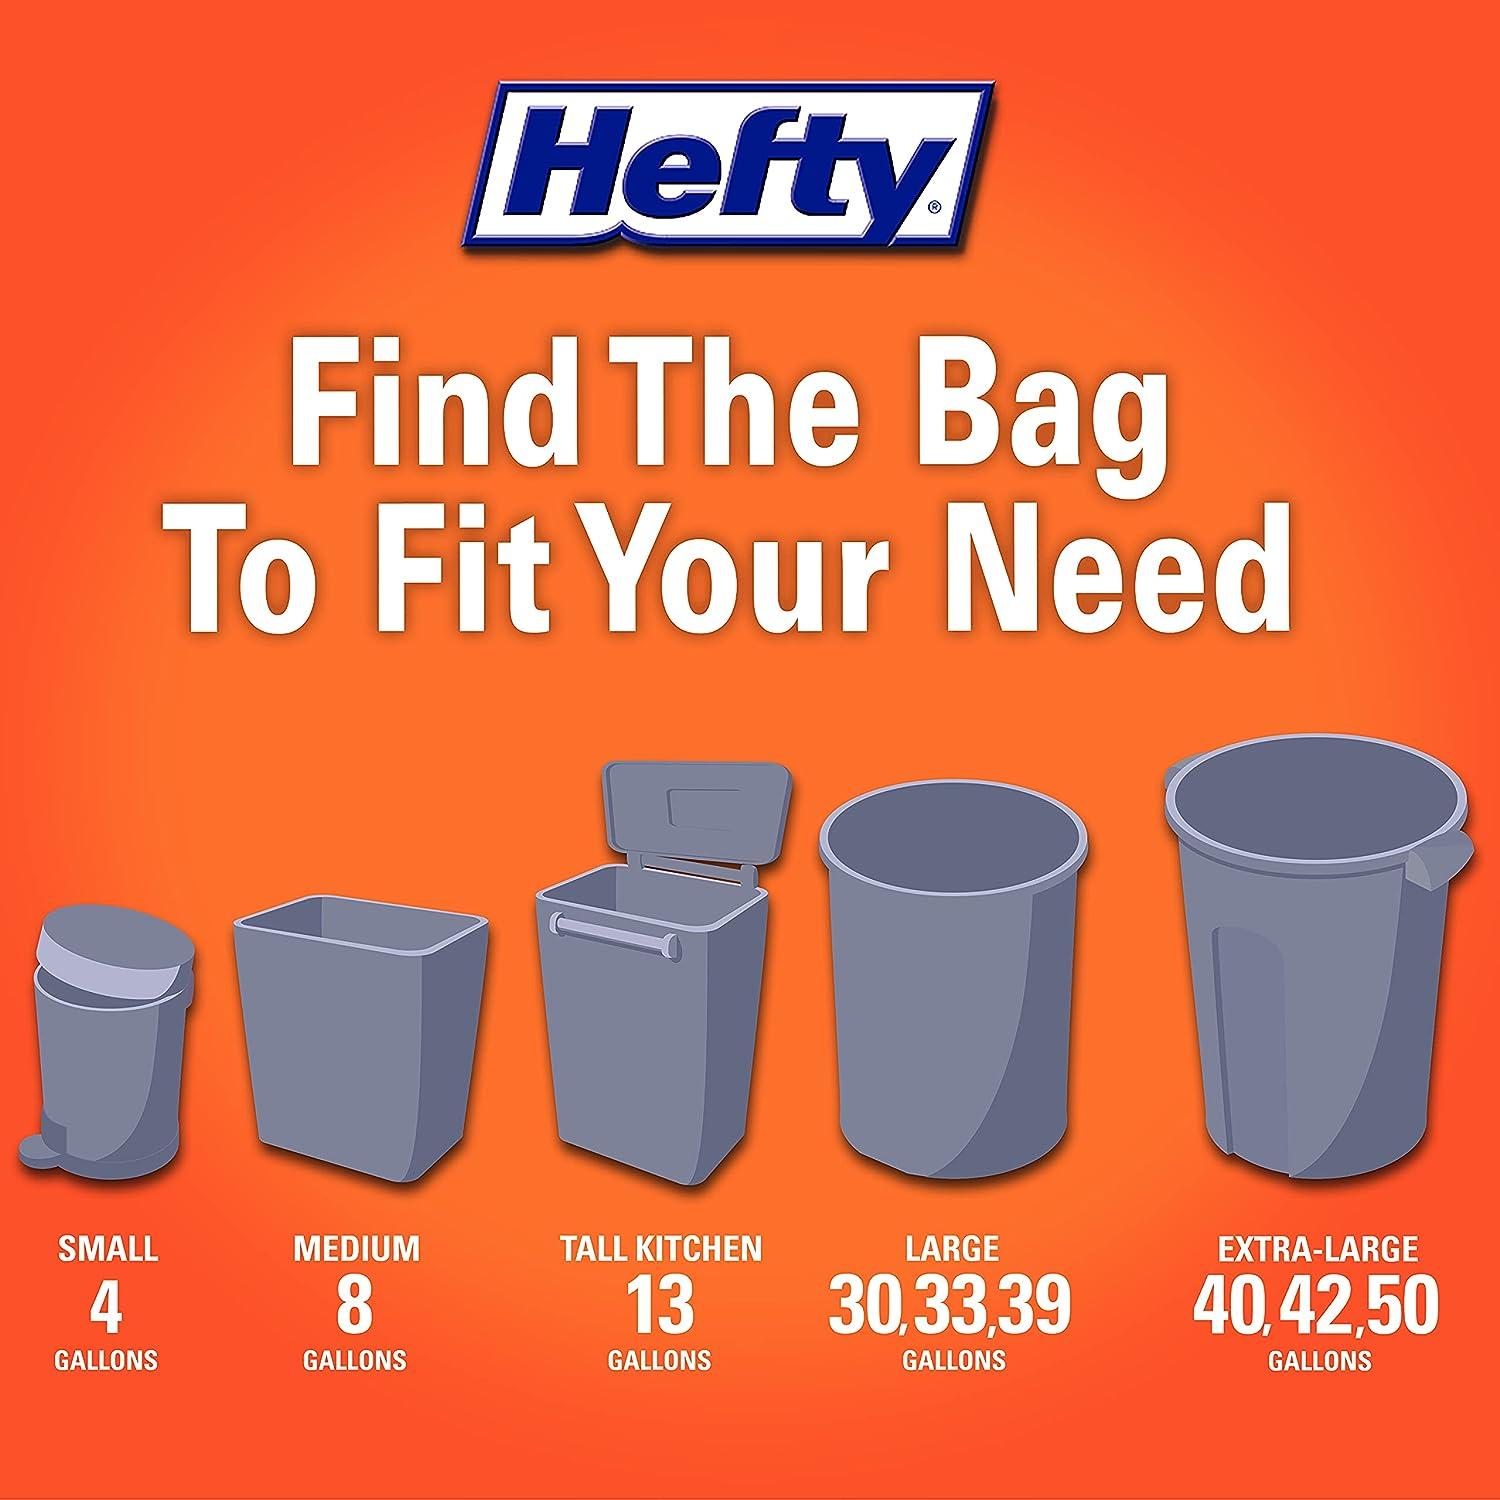 Hefty Flap Tie Small Trash Bags - Tropical Paradise, 4 Gallon, 26 26 Count